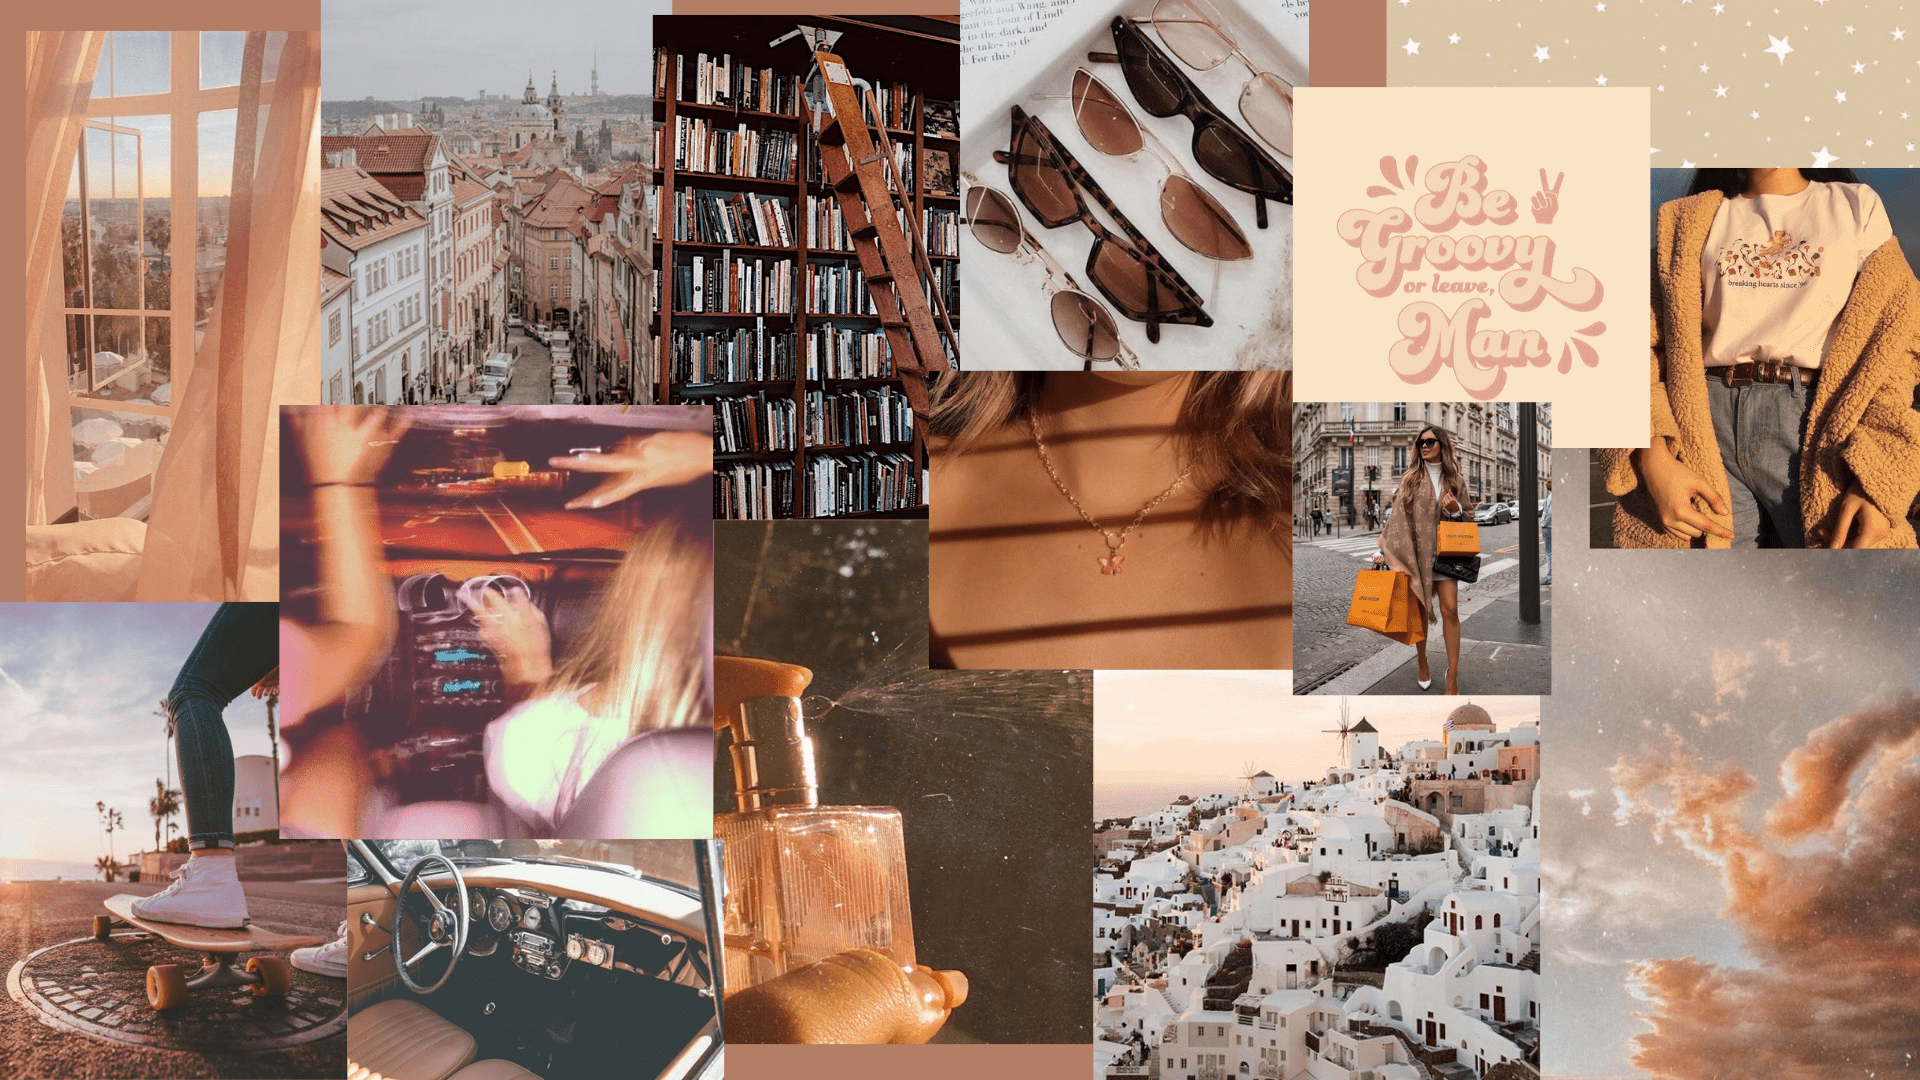 A collage of images including books, a car, a sunset, and a person reading. - Desktop, honey, November, collage